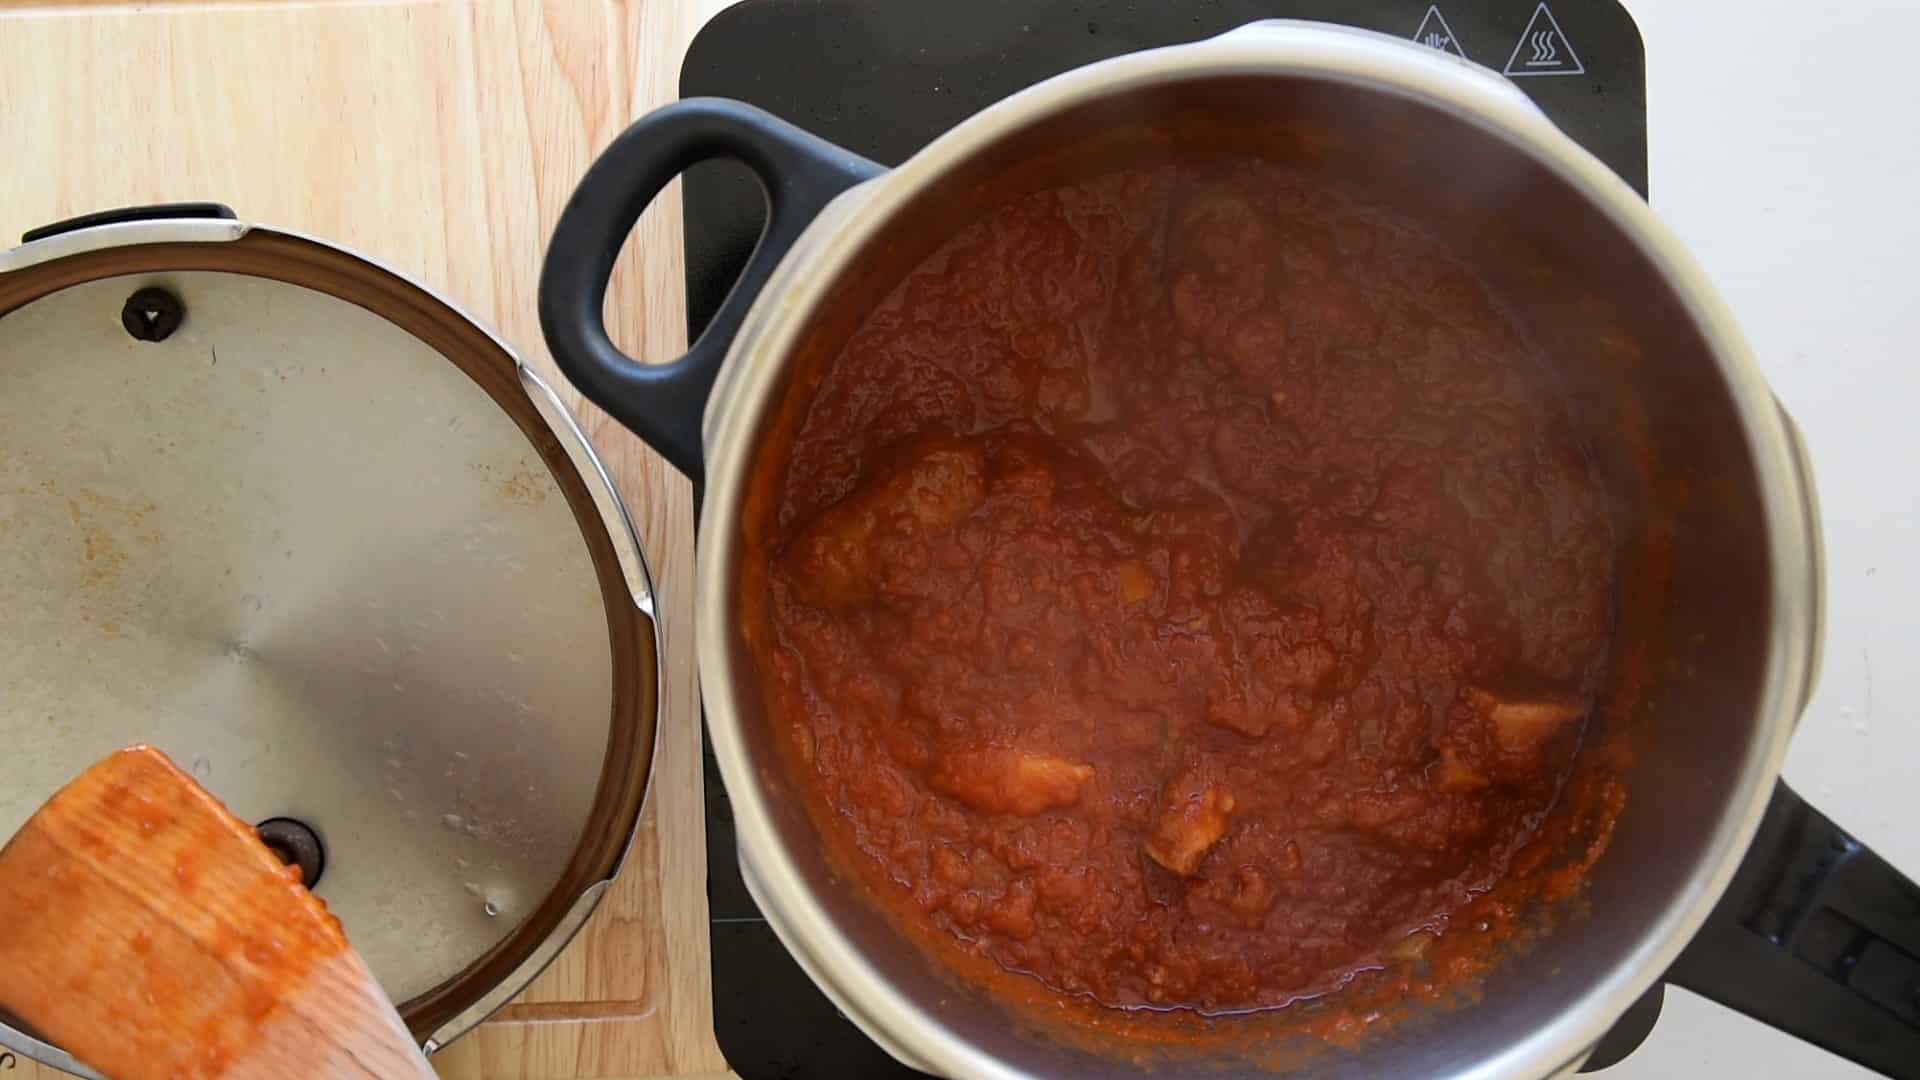 Let the ragu cook for 35 minutes in the pressure cooker